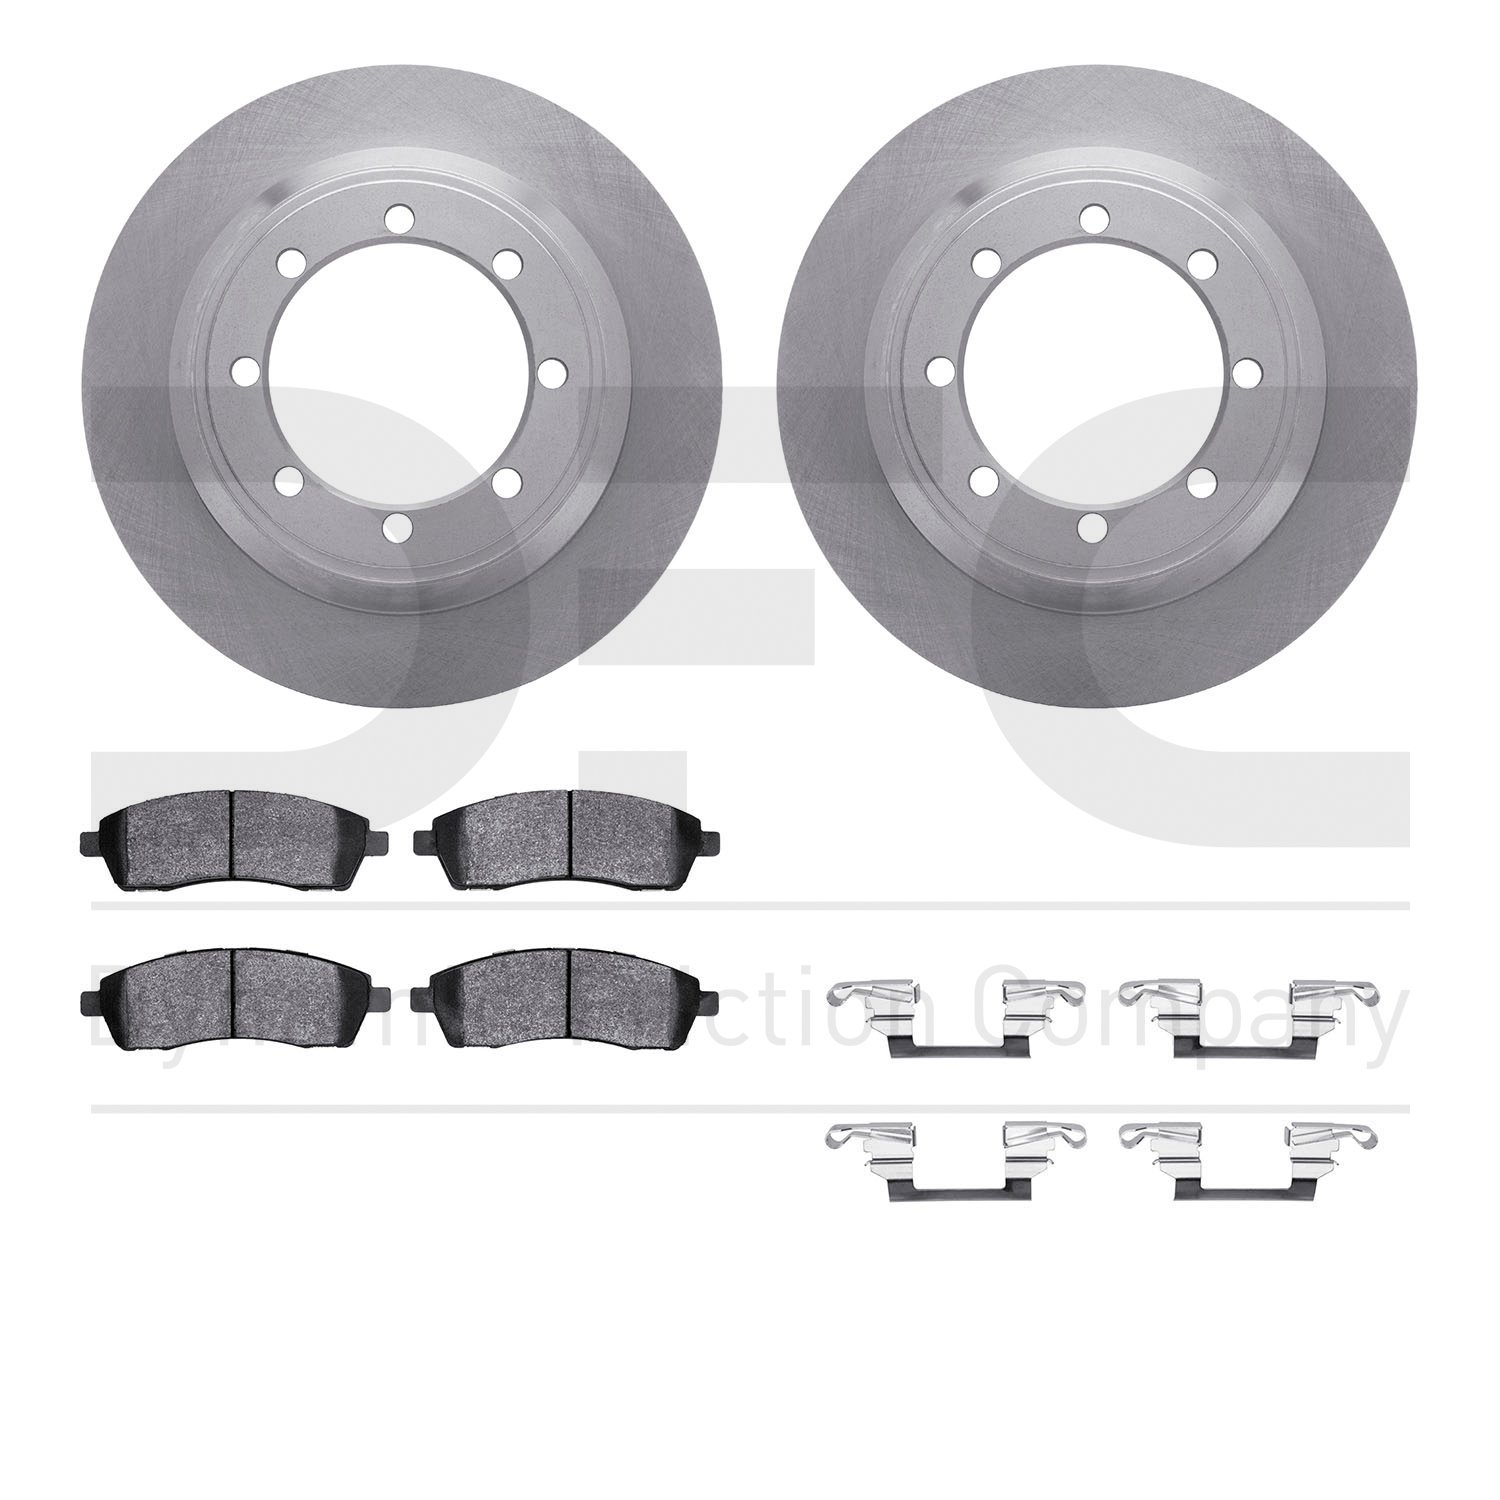 6412-54137 Brake Rotors with Ultimate-Duty Brake Pads Kit & Hardware, 1999-2004 Ford/Lincoln/Mercury/Mazda, Position: Rear